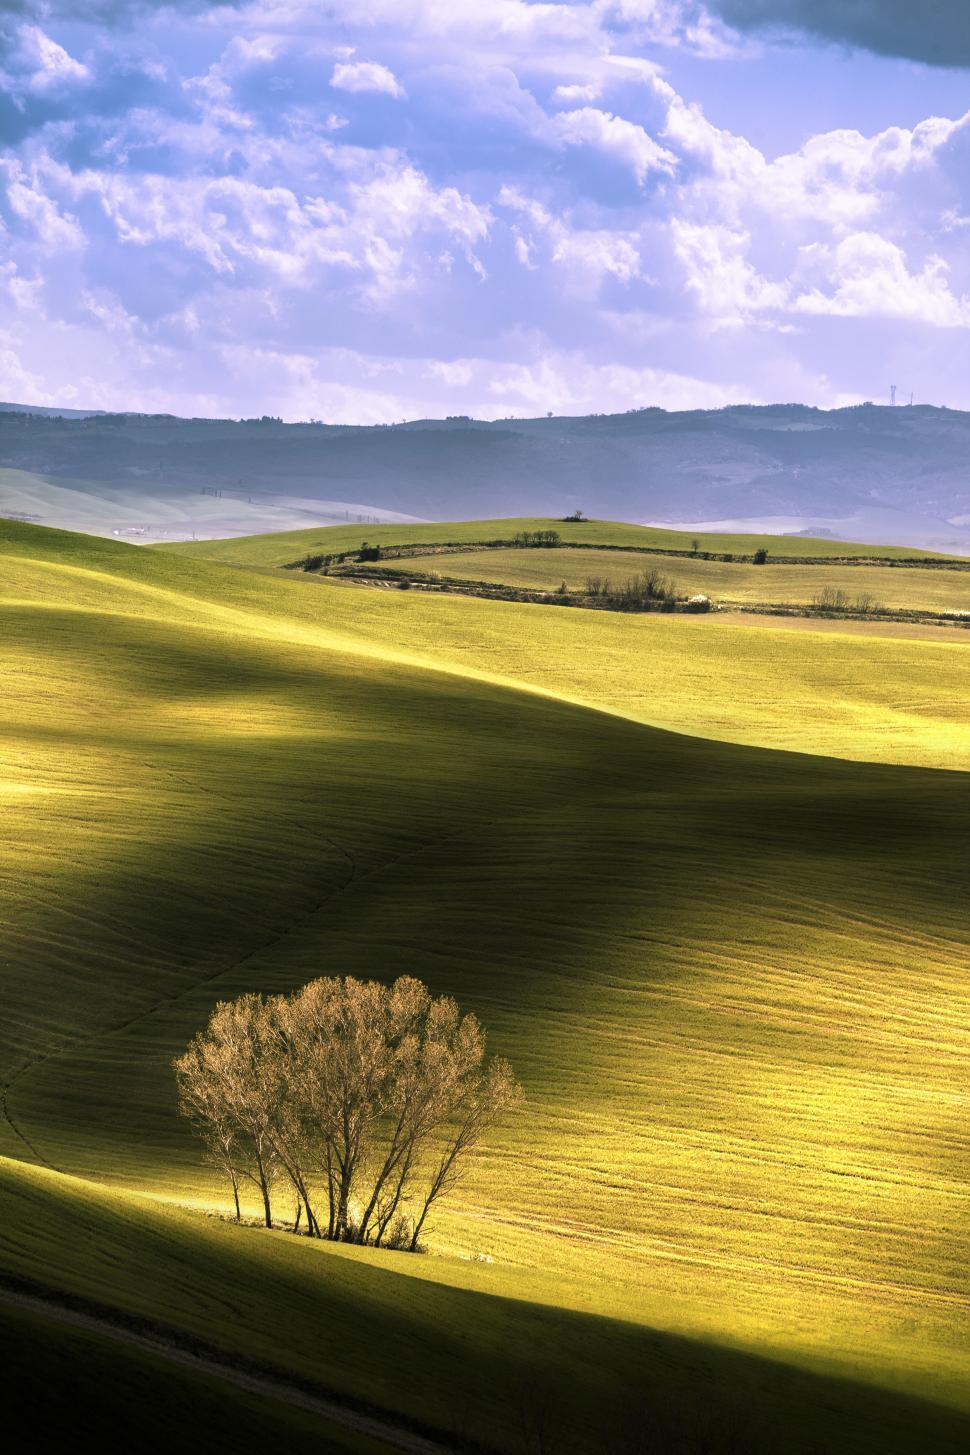 Free Image of A rolling hills with trees and hills in the background 